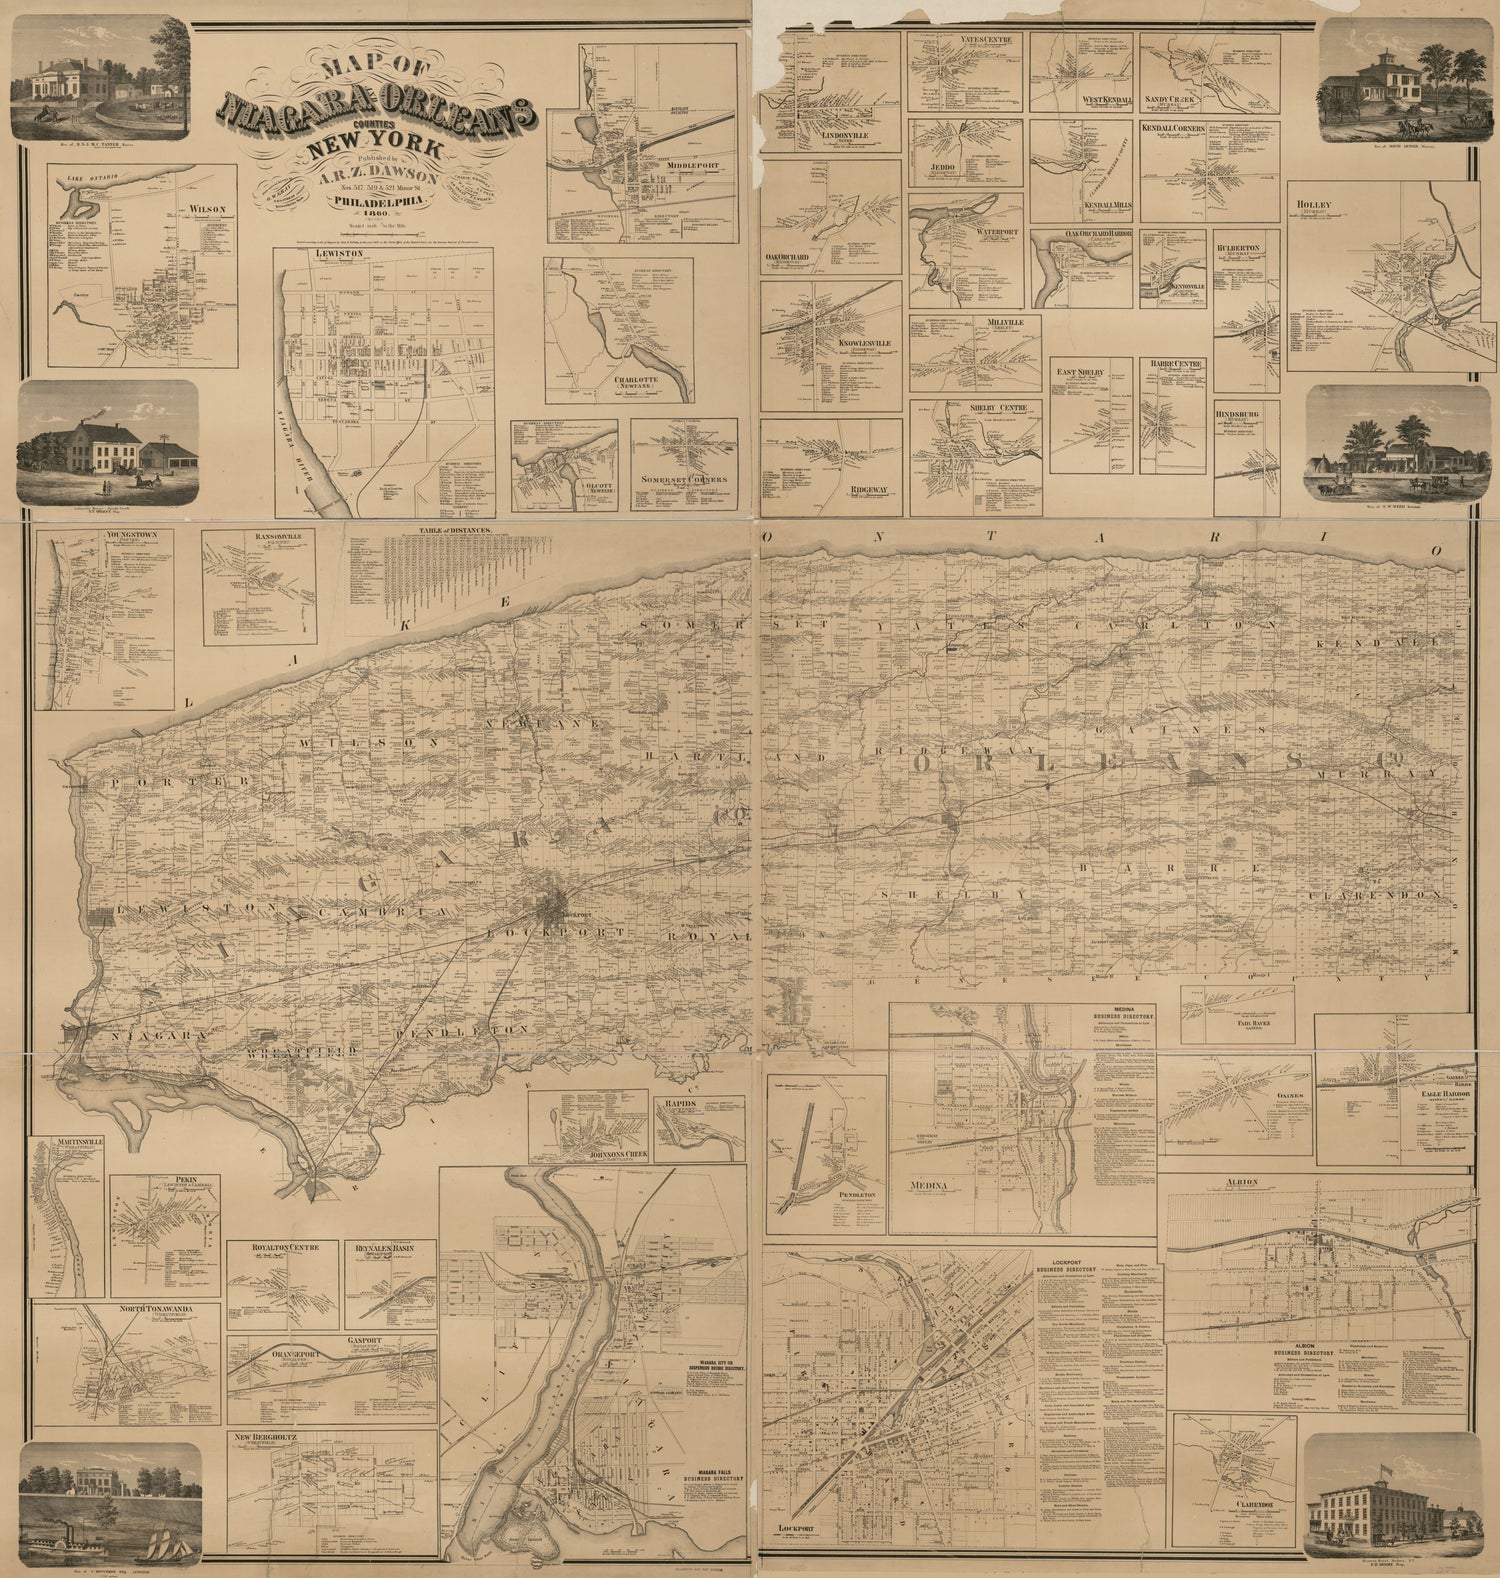 This old map of Map of Niagara and Orleans Counties, New York from 1860 was created by A. R. Z. Dawson, John E. Gillette, O. W. (Ormando Wyllis) Gray in 1860